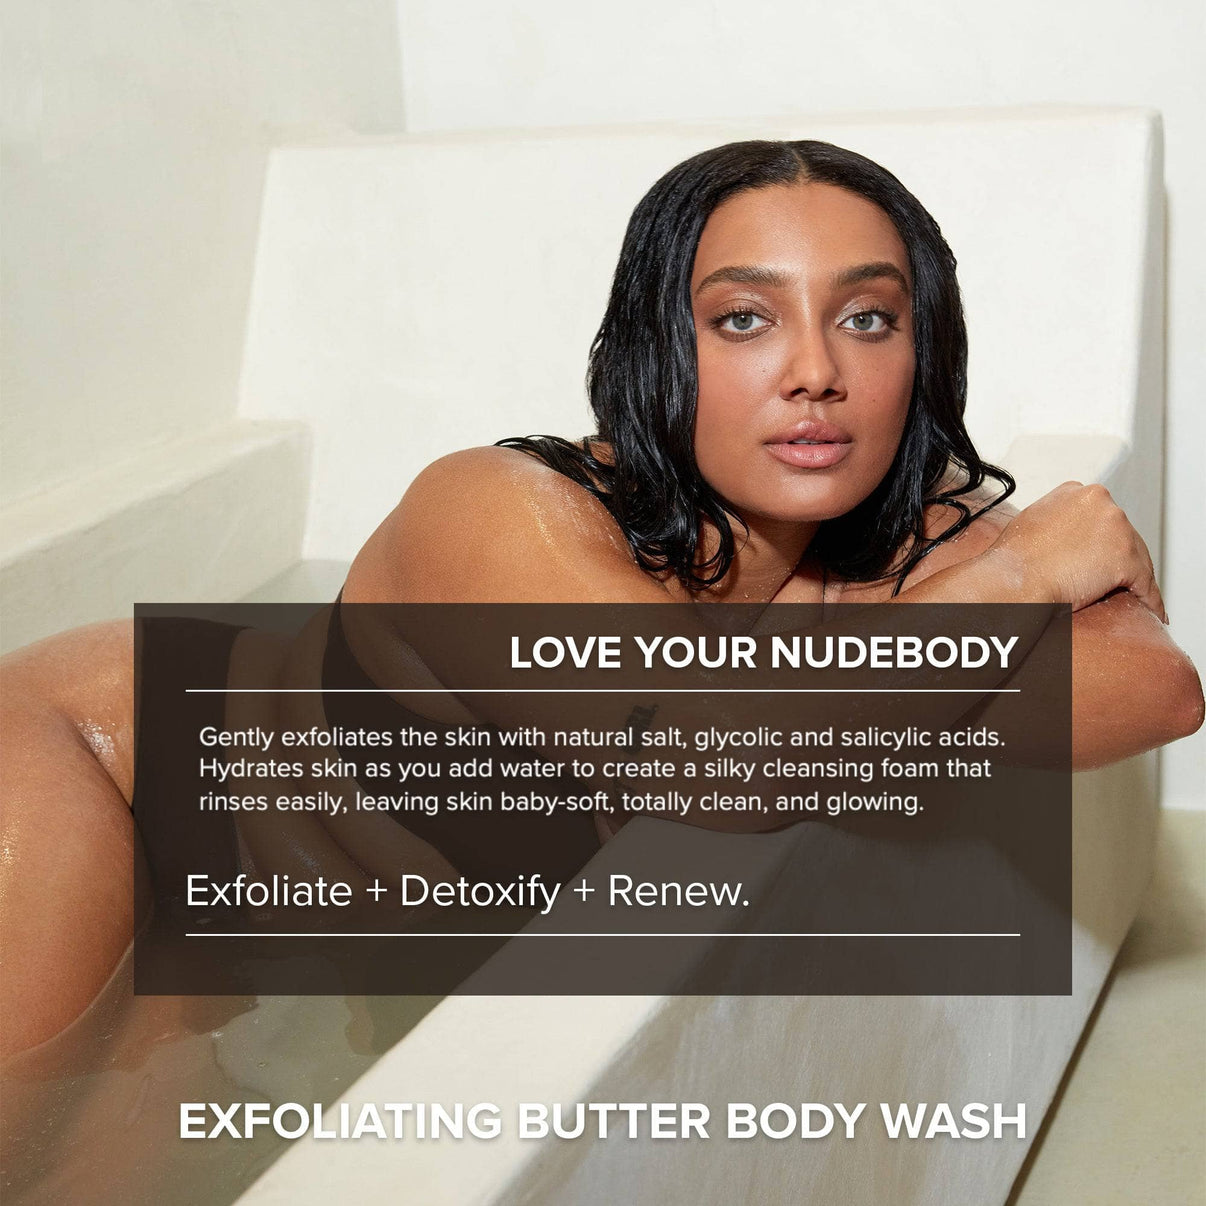 Love your nudebody - Exfoliating butter body wash